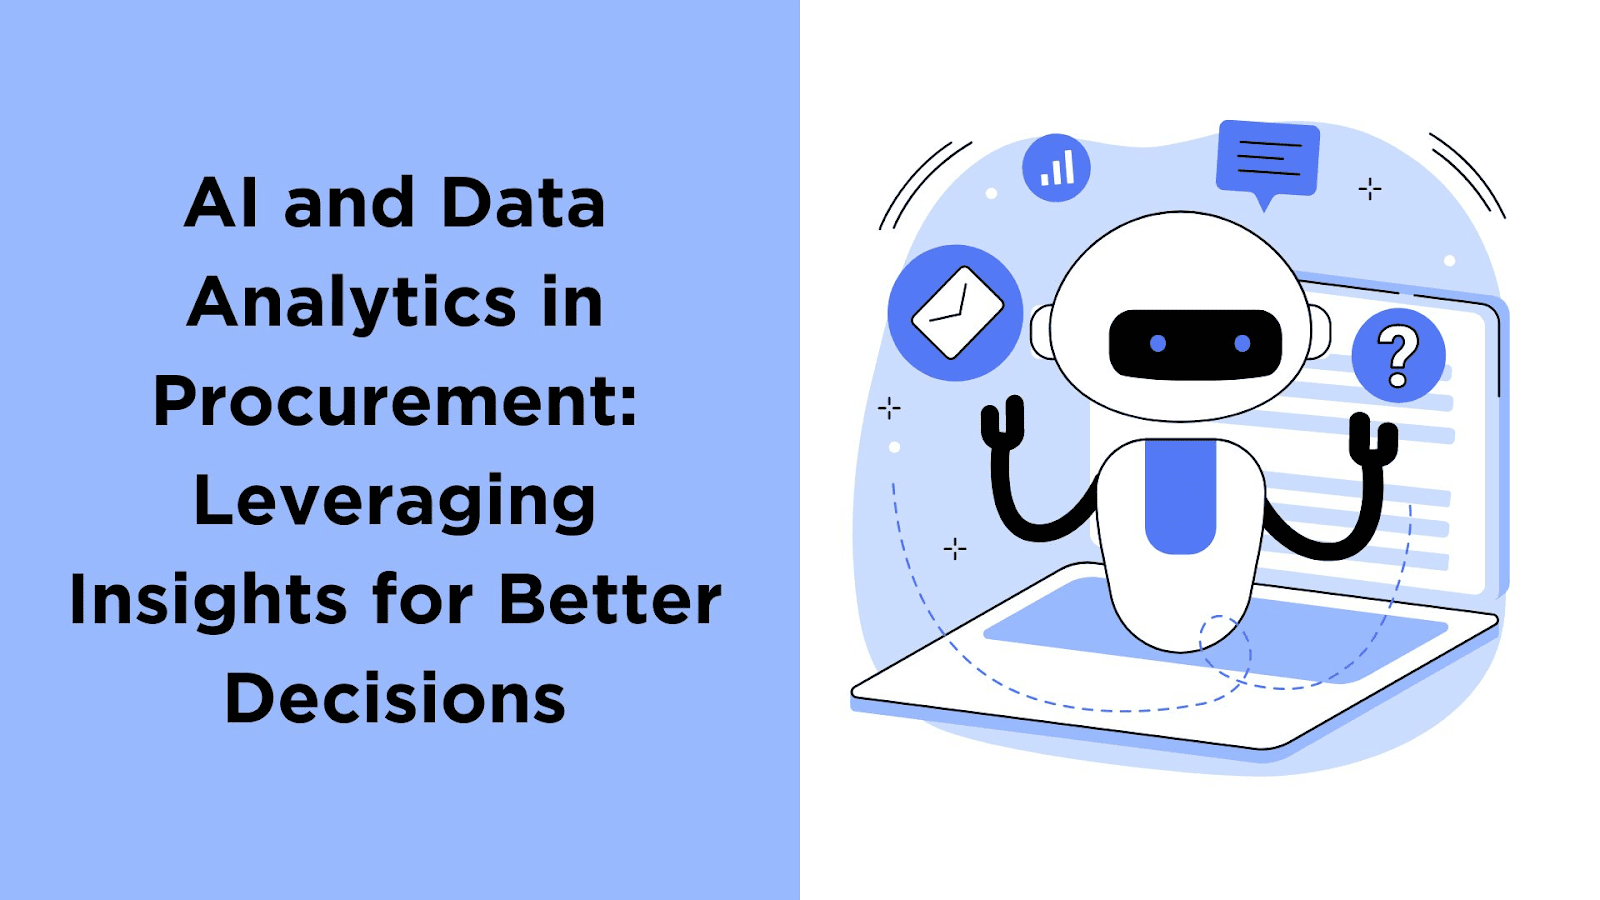 AI and Data Analytics in Procurement: Leveraging Insights for Better Decisions